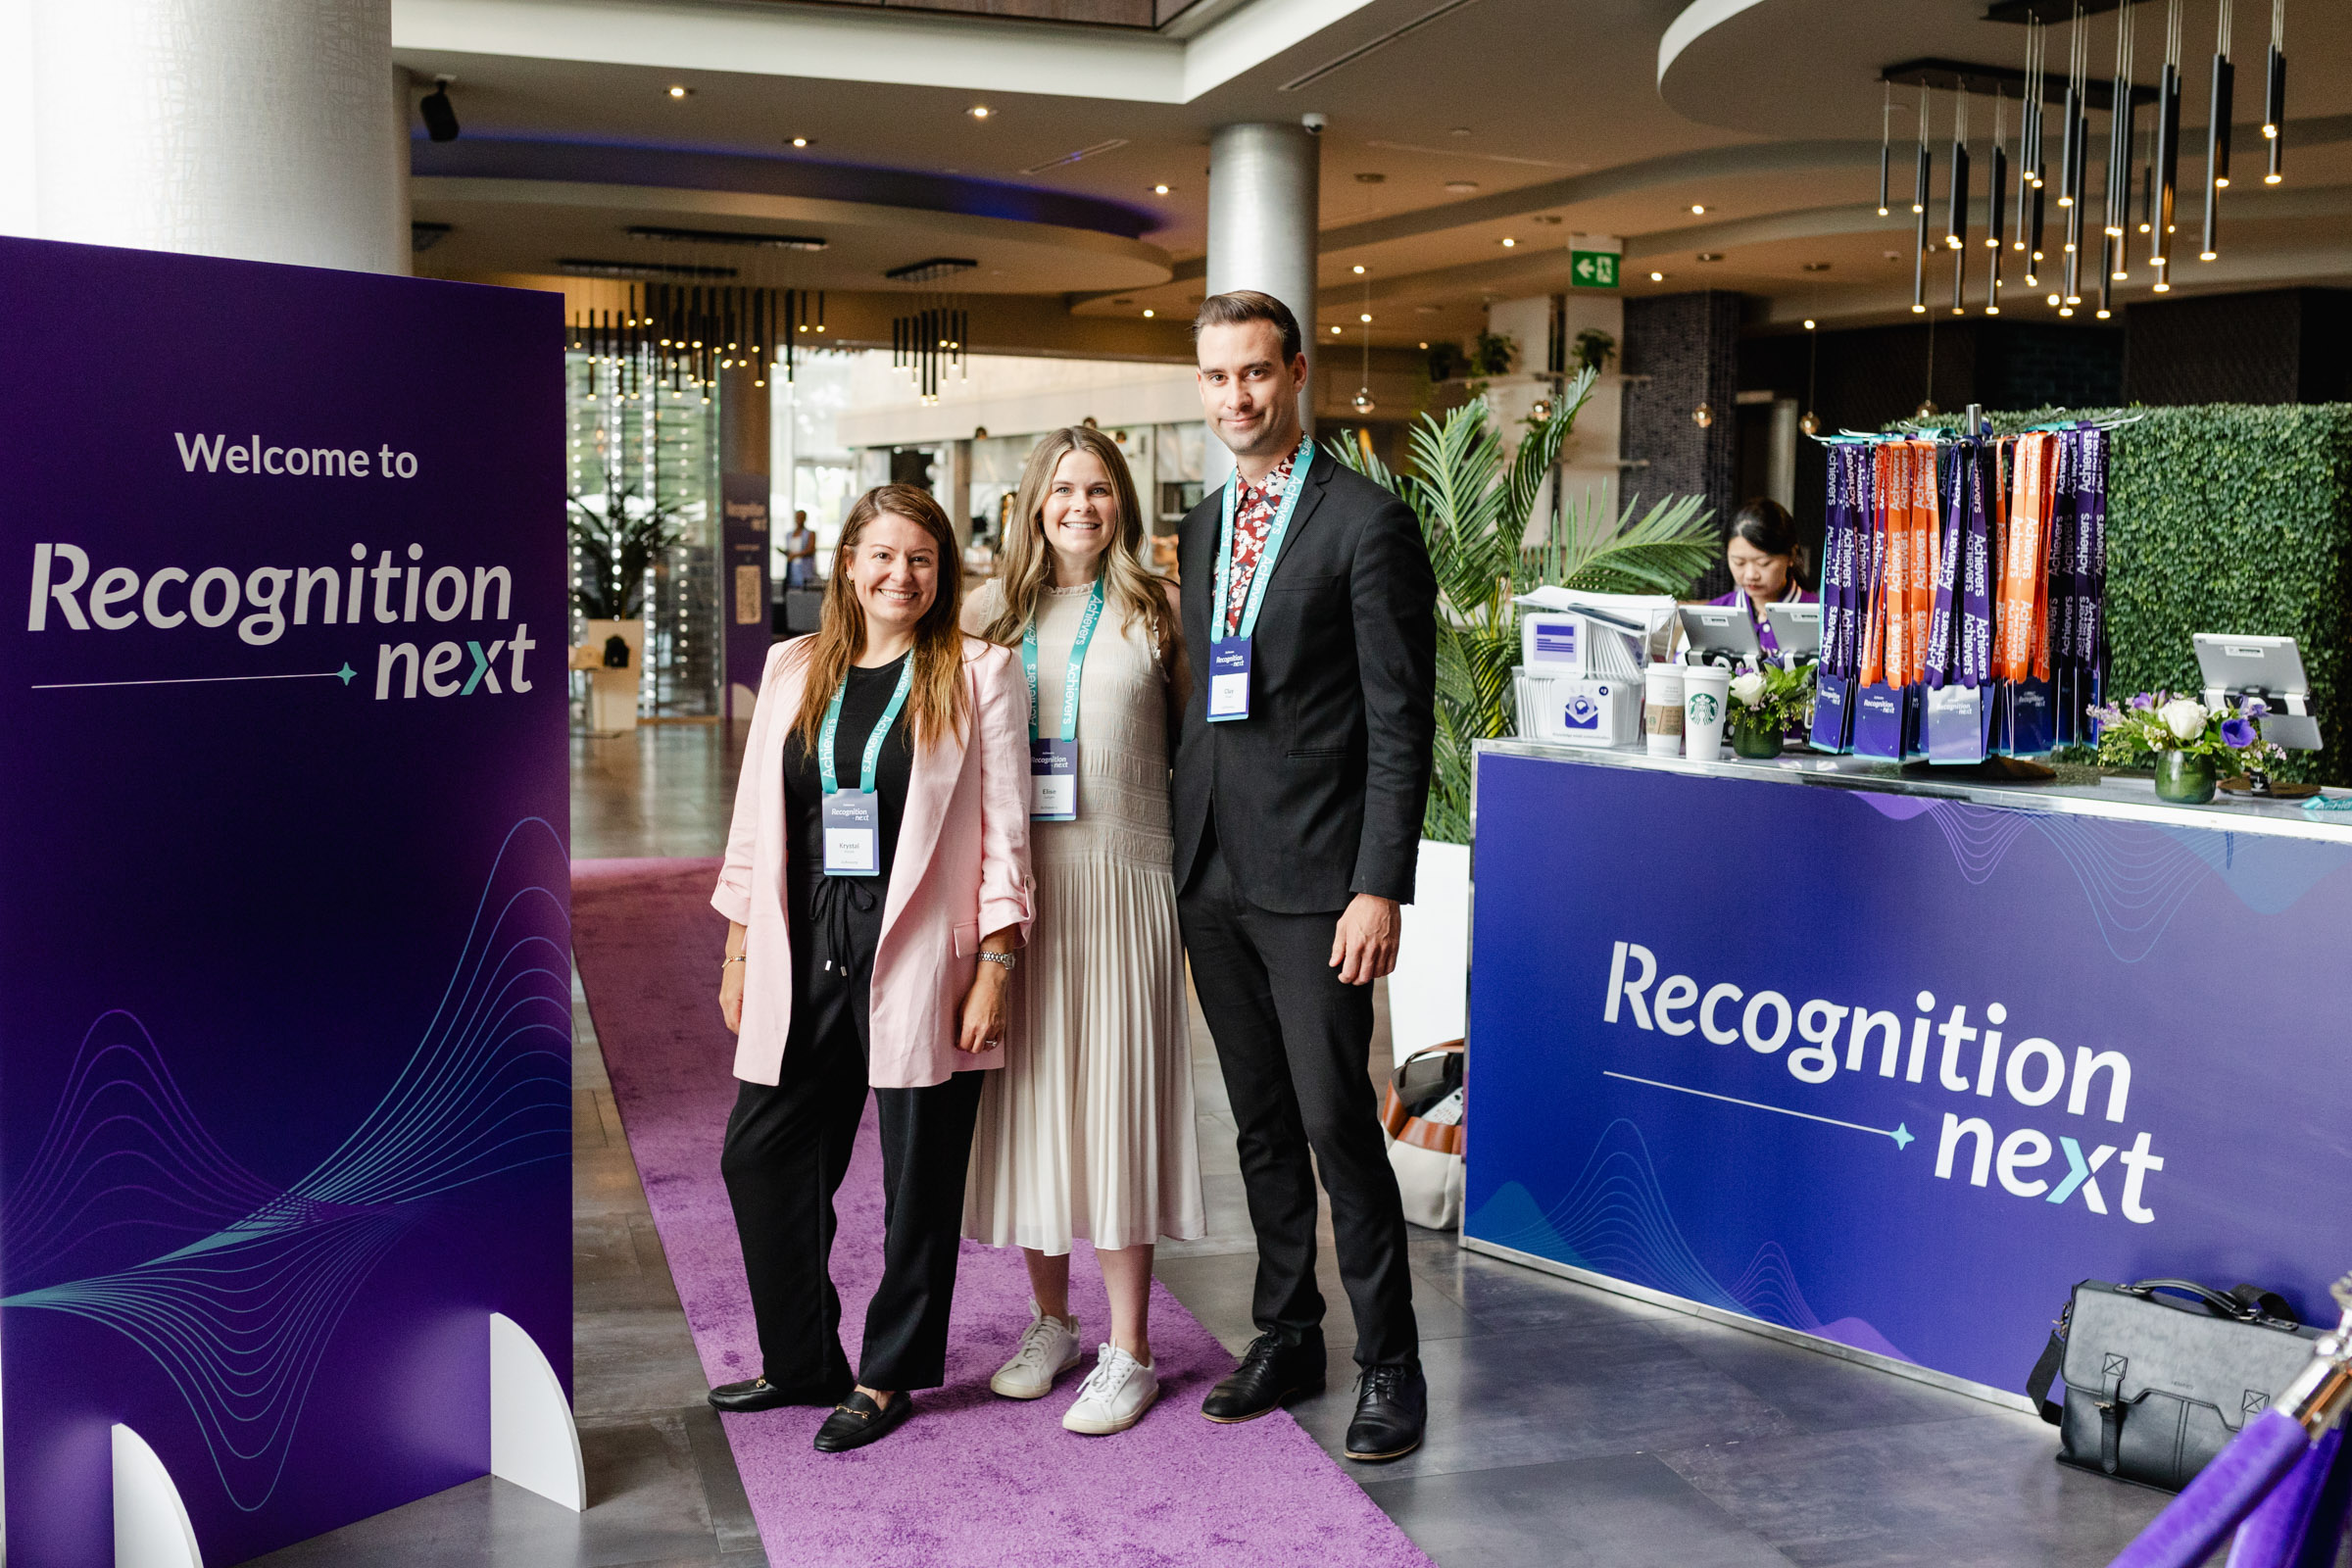 Three people posing in front of a "Recognition Next" conference sign and check-in desk in a modern venue with purple and blue decor, captured perfectly through event photography.